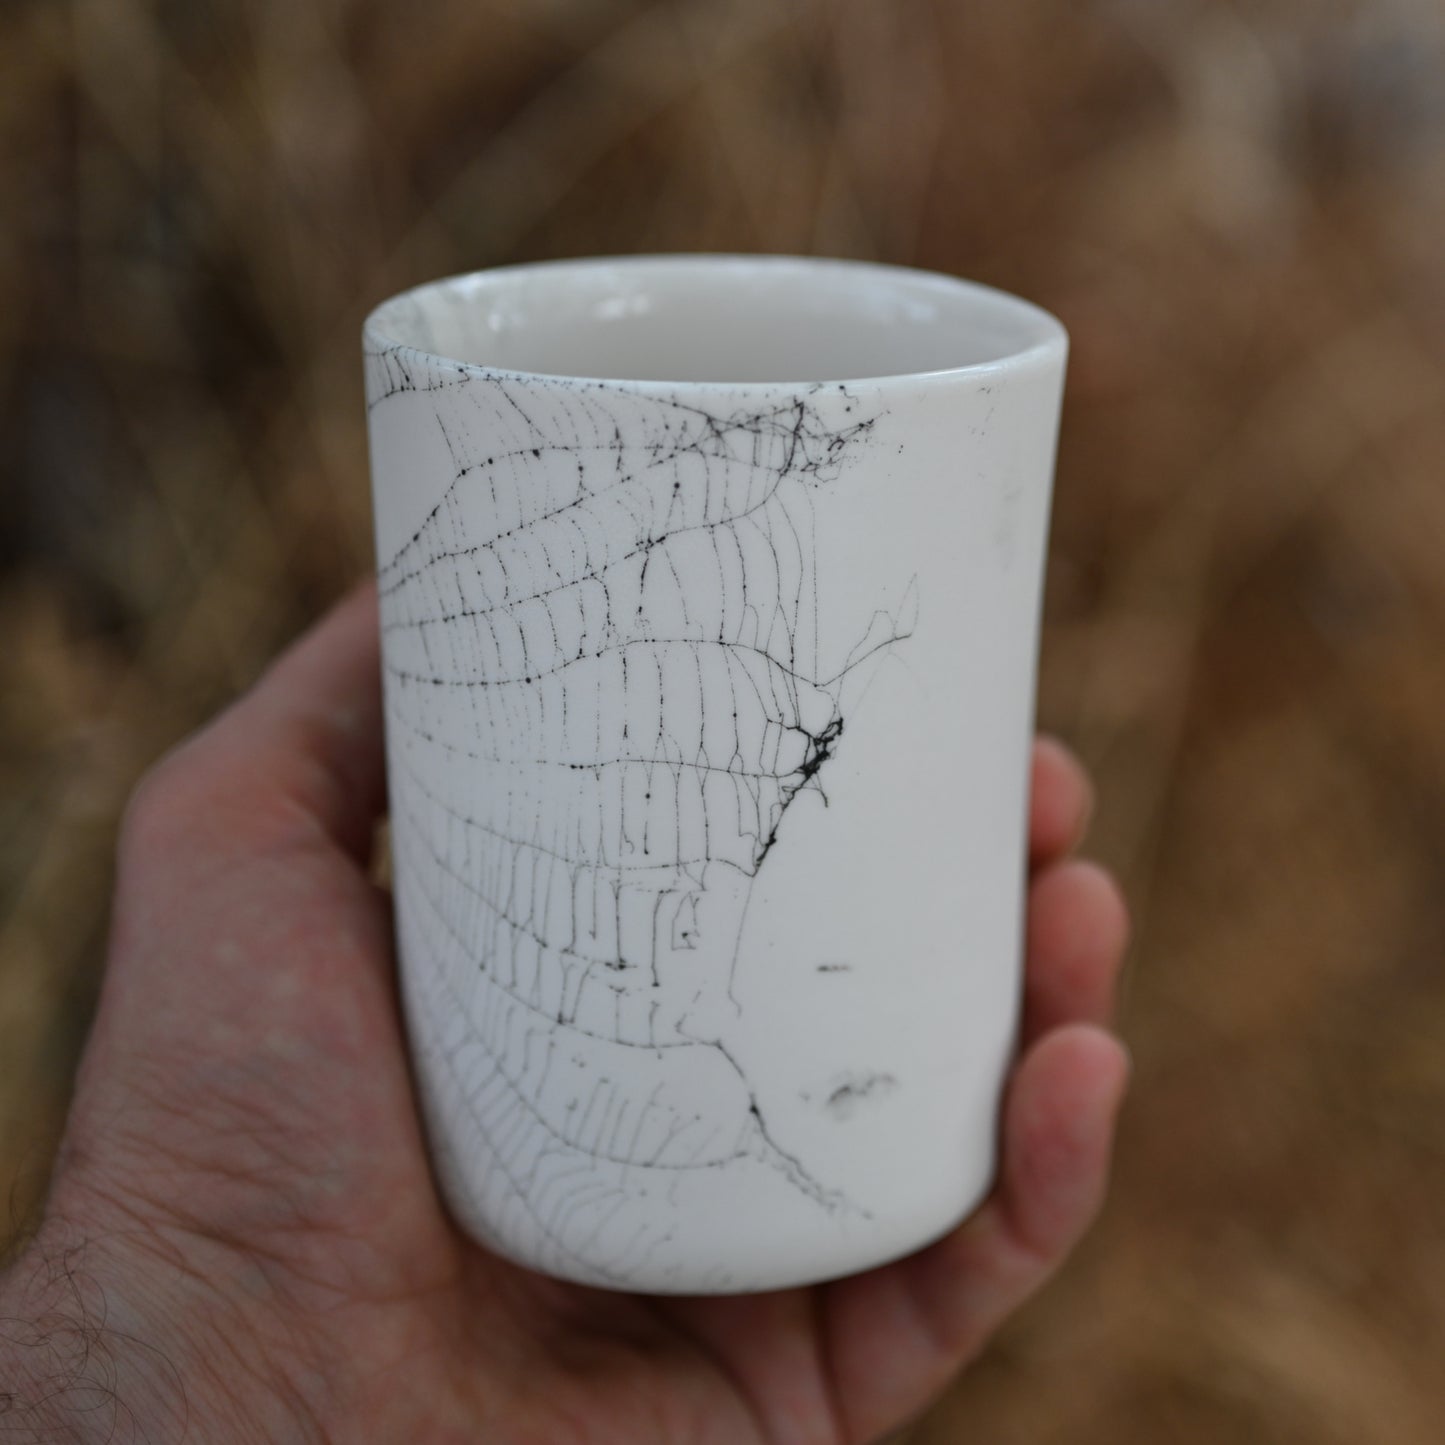 Web on Clay (010), Collected July 30, 2022